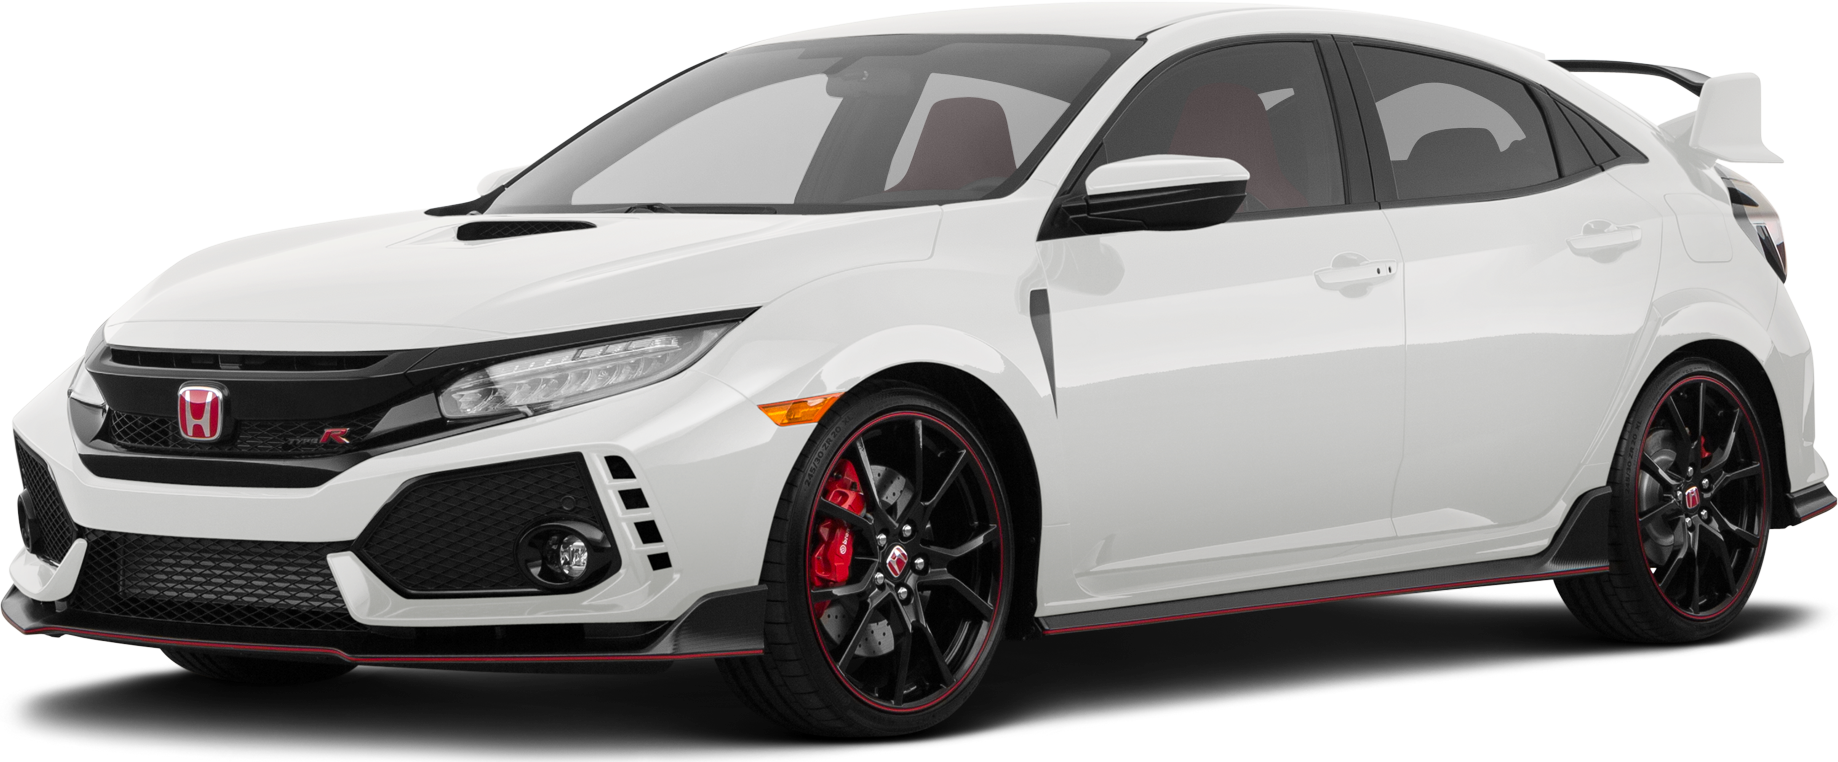 18 Honda Civic Type R Values Cars For Sale Kelley Blue Book